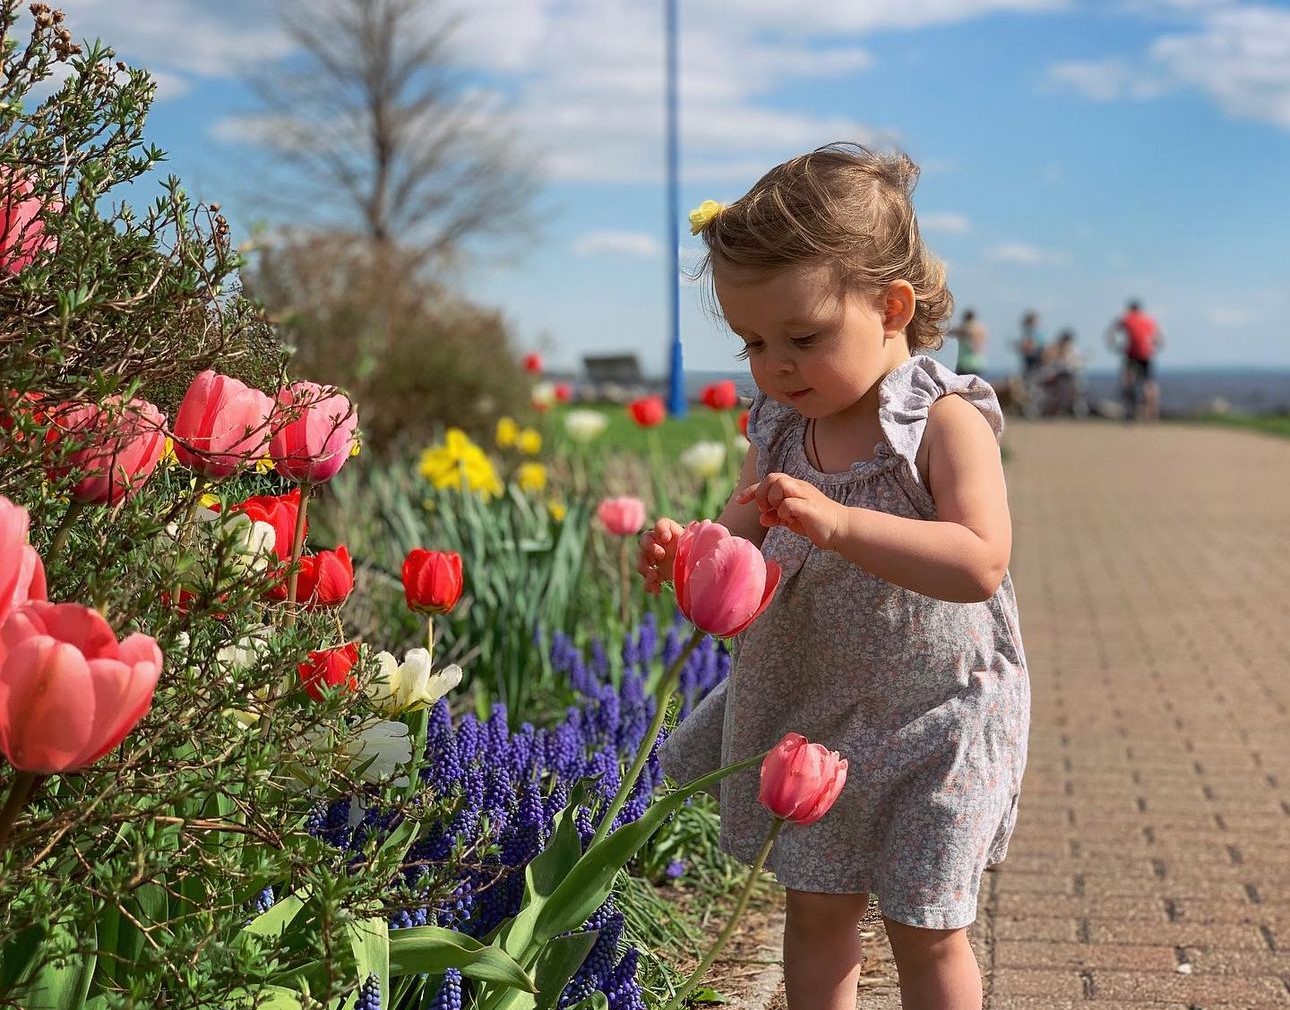 A young girl enjoying the North Bay waterfront heritage gardens